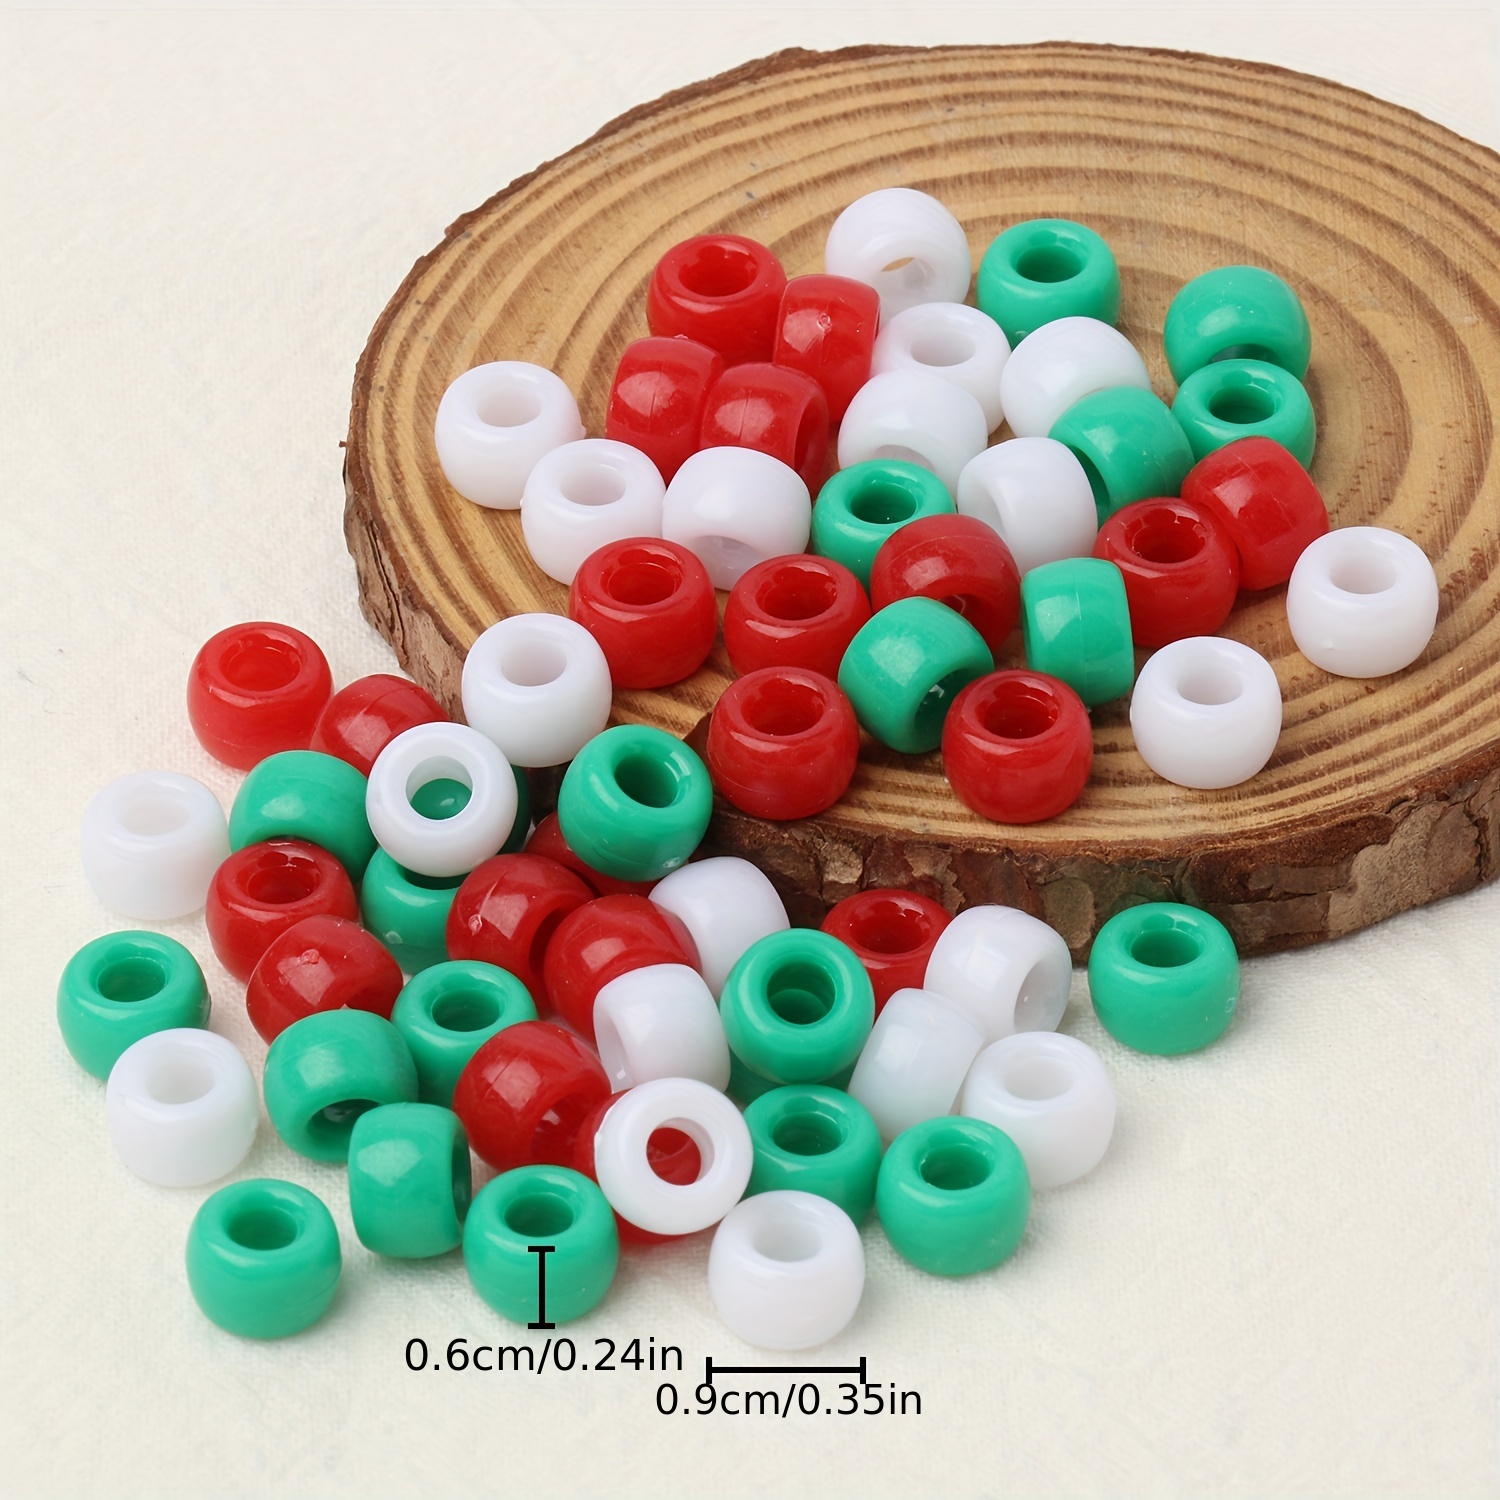 Gxueshan 1000 Pcs Acrylic Red Pony Beads 6x9mm Bulk for Arts Craft Bracelet Necklace Jewelry Making Earring Hair Braiding (Red2)